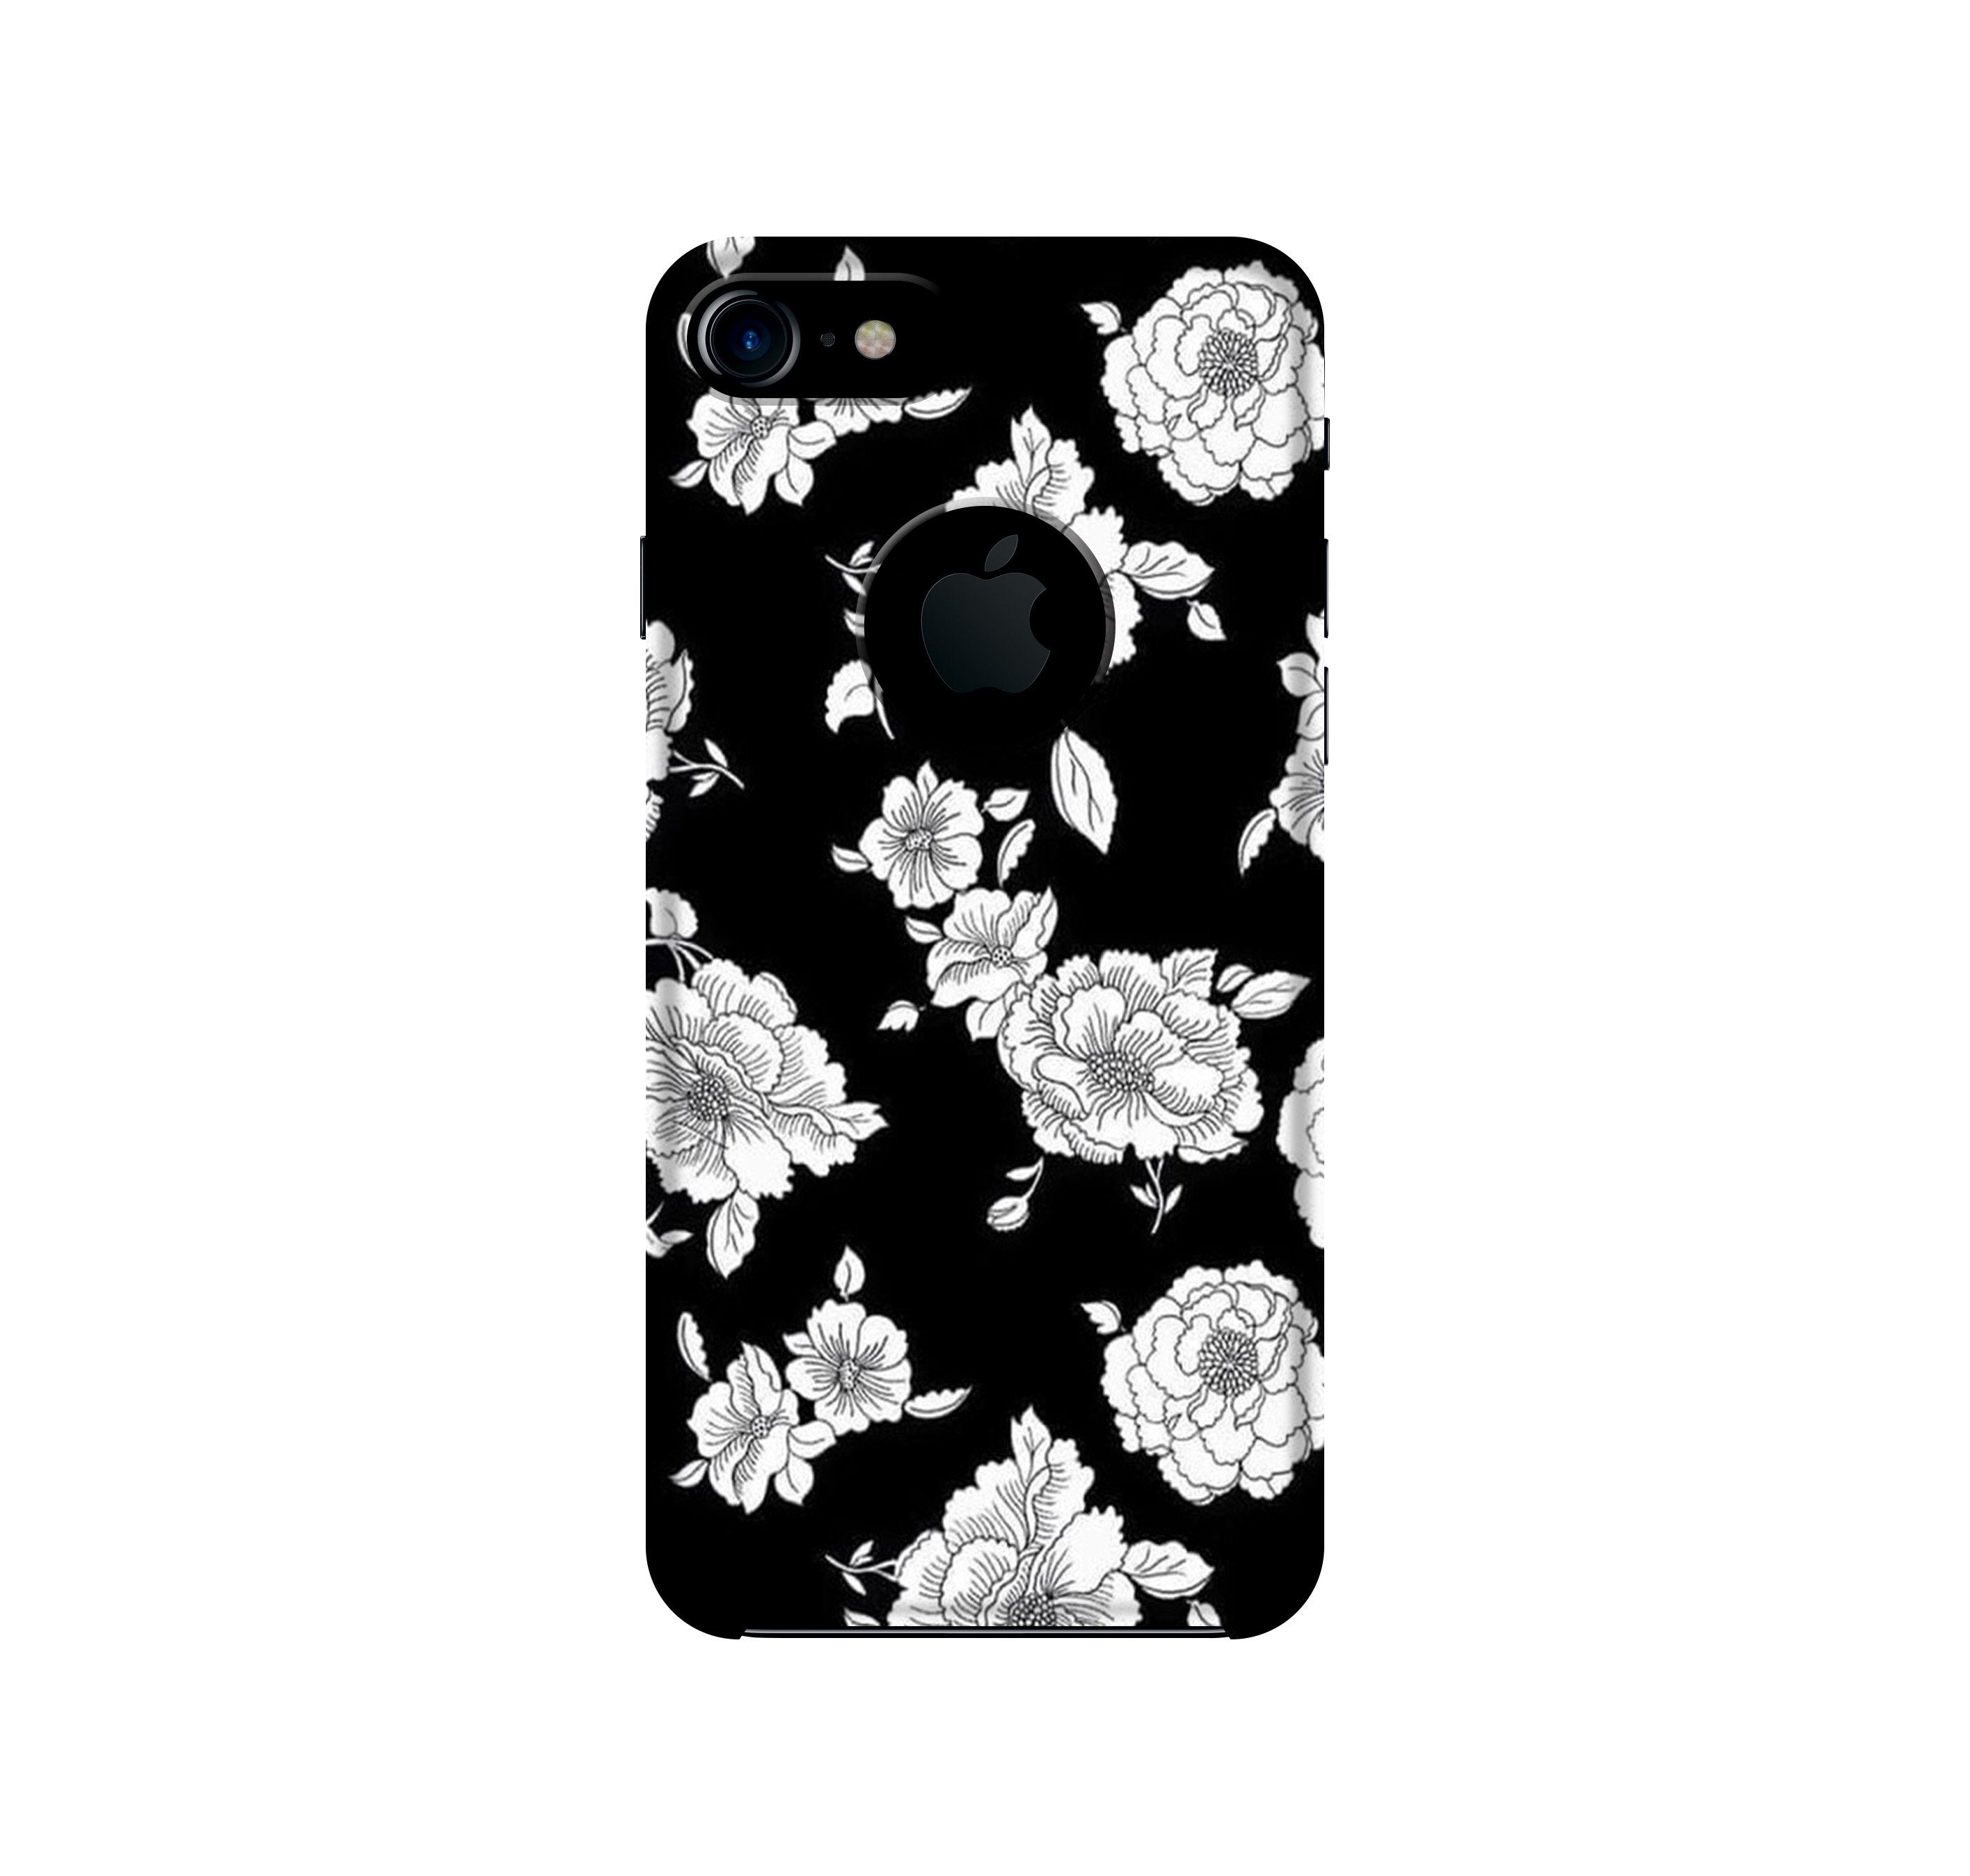 White flowers Black Background Case for iPhone 7 logo cut